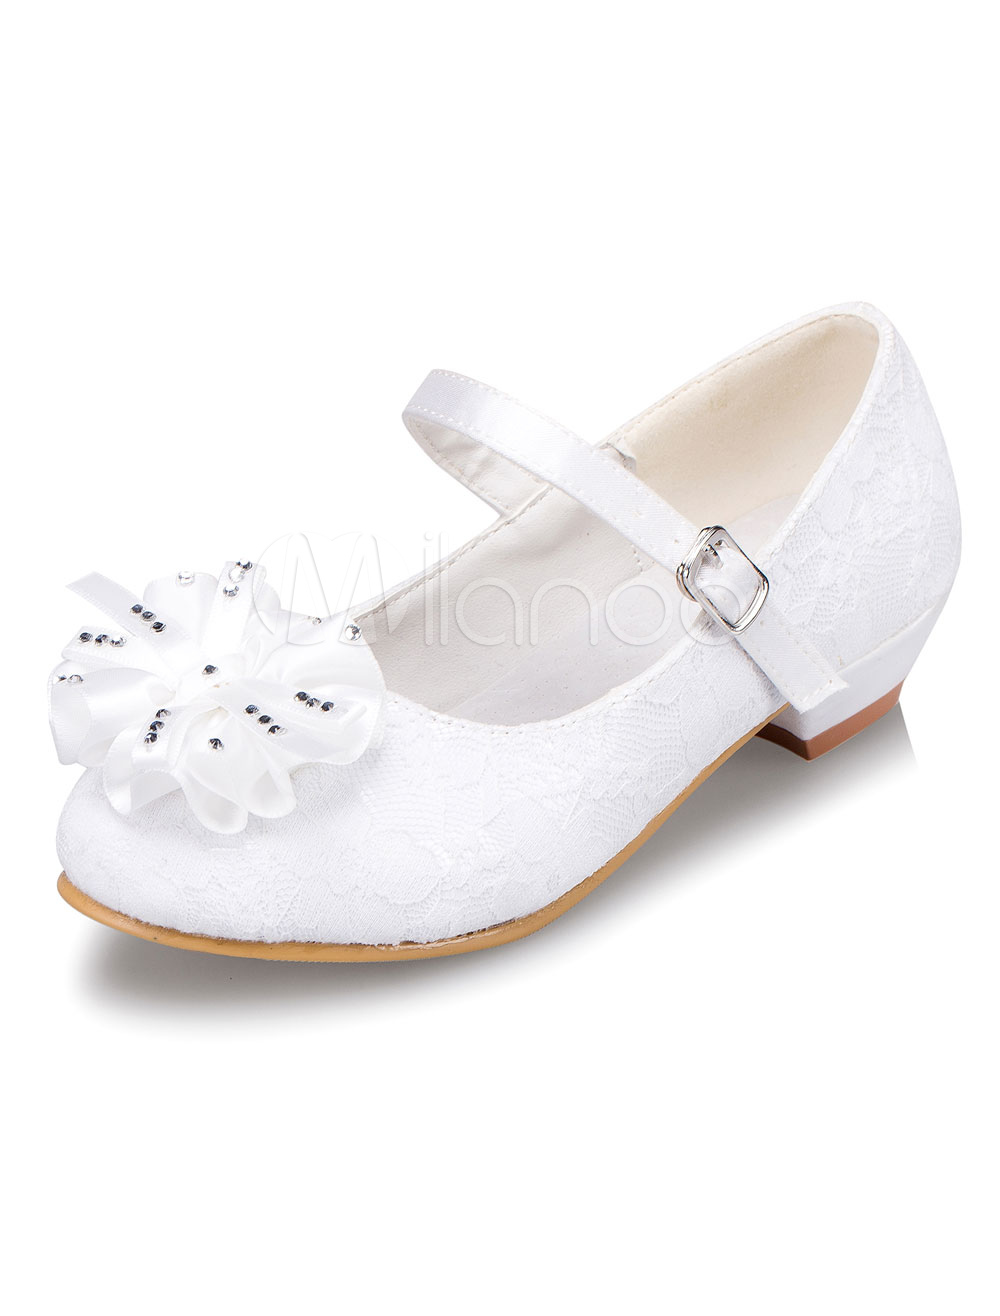 White Flower Girl Shoes Flower Lace Straps PU Shoes for Girls - Milanoo.com